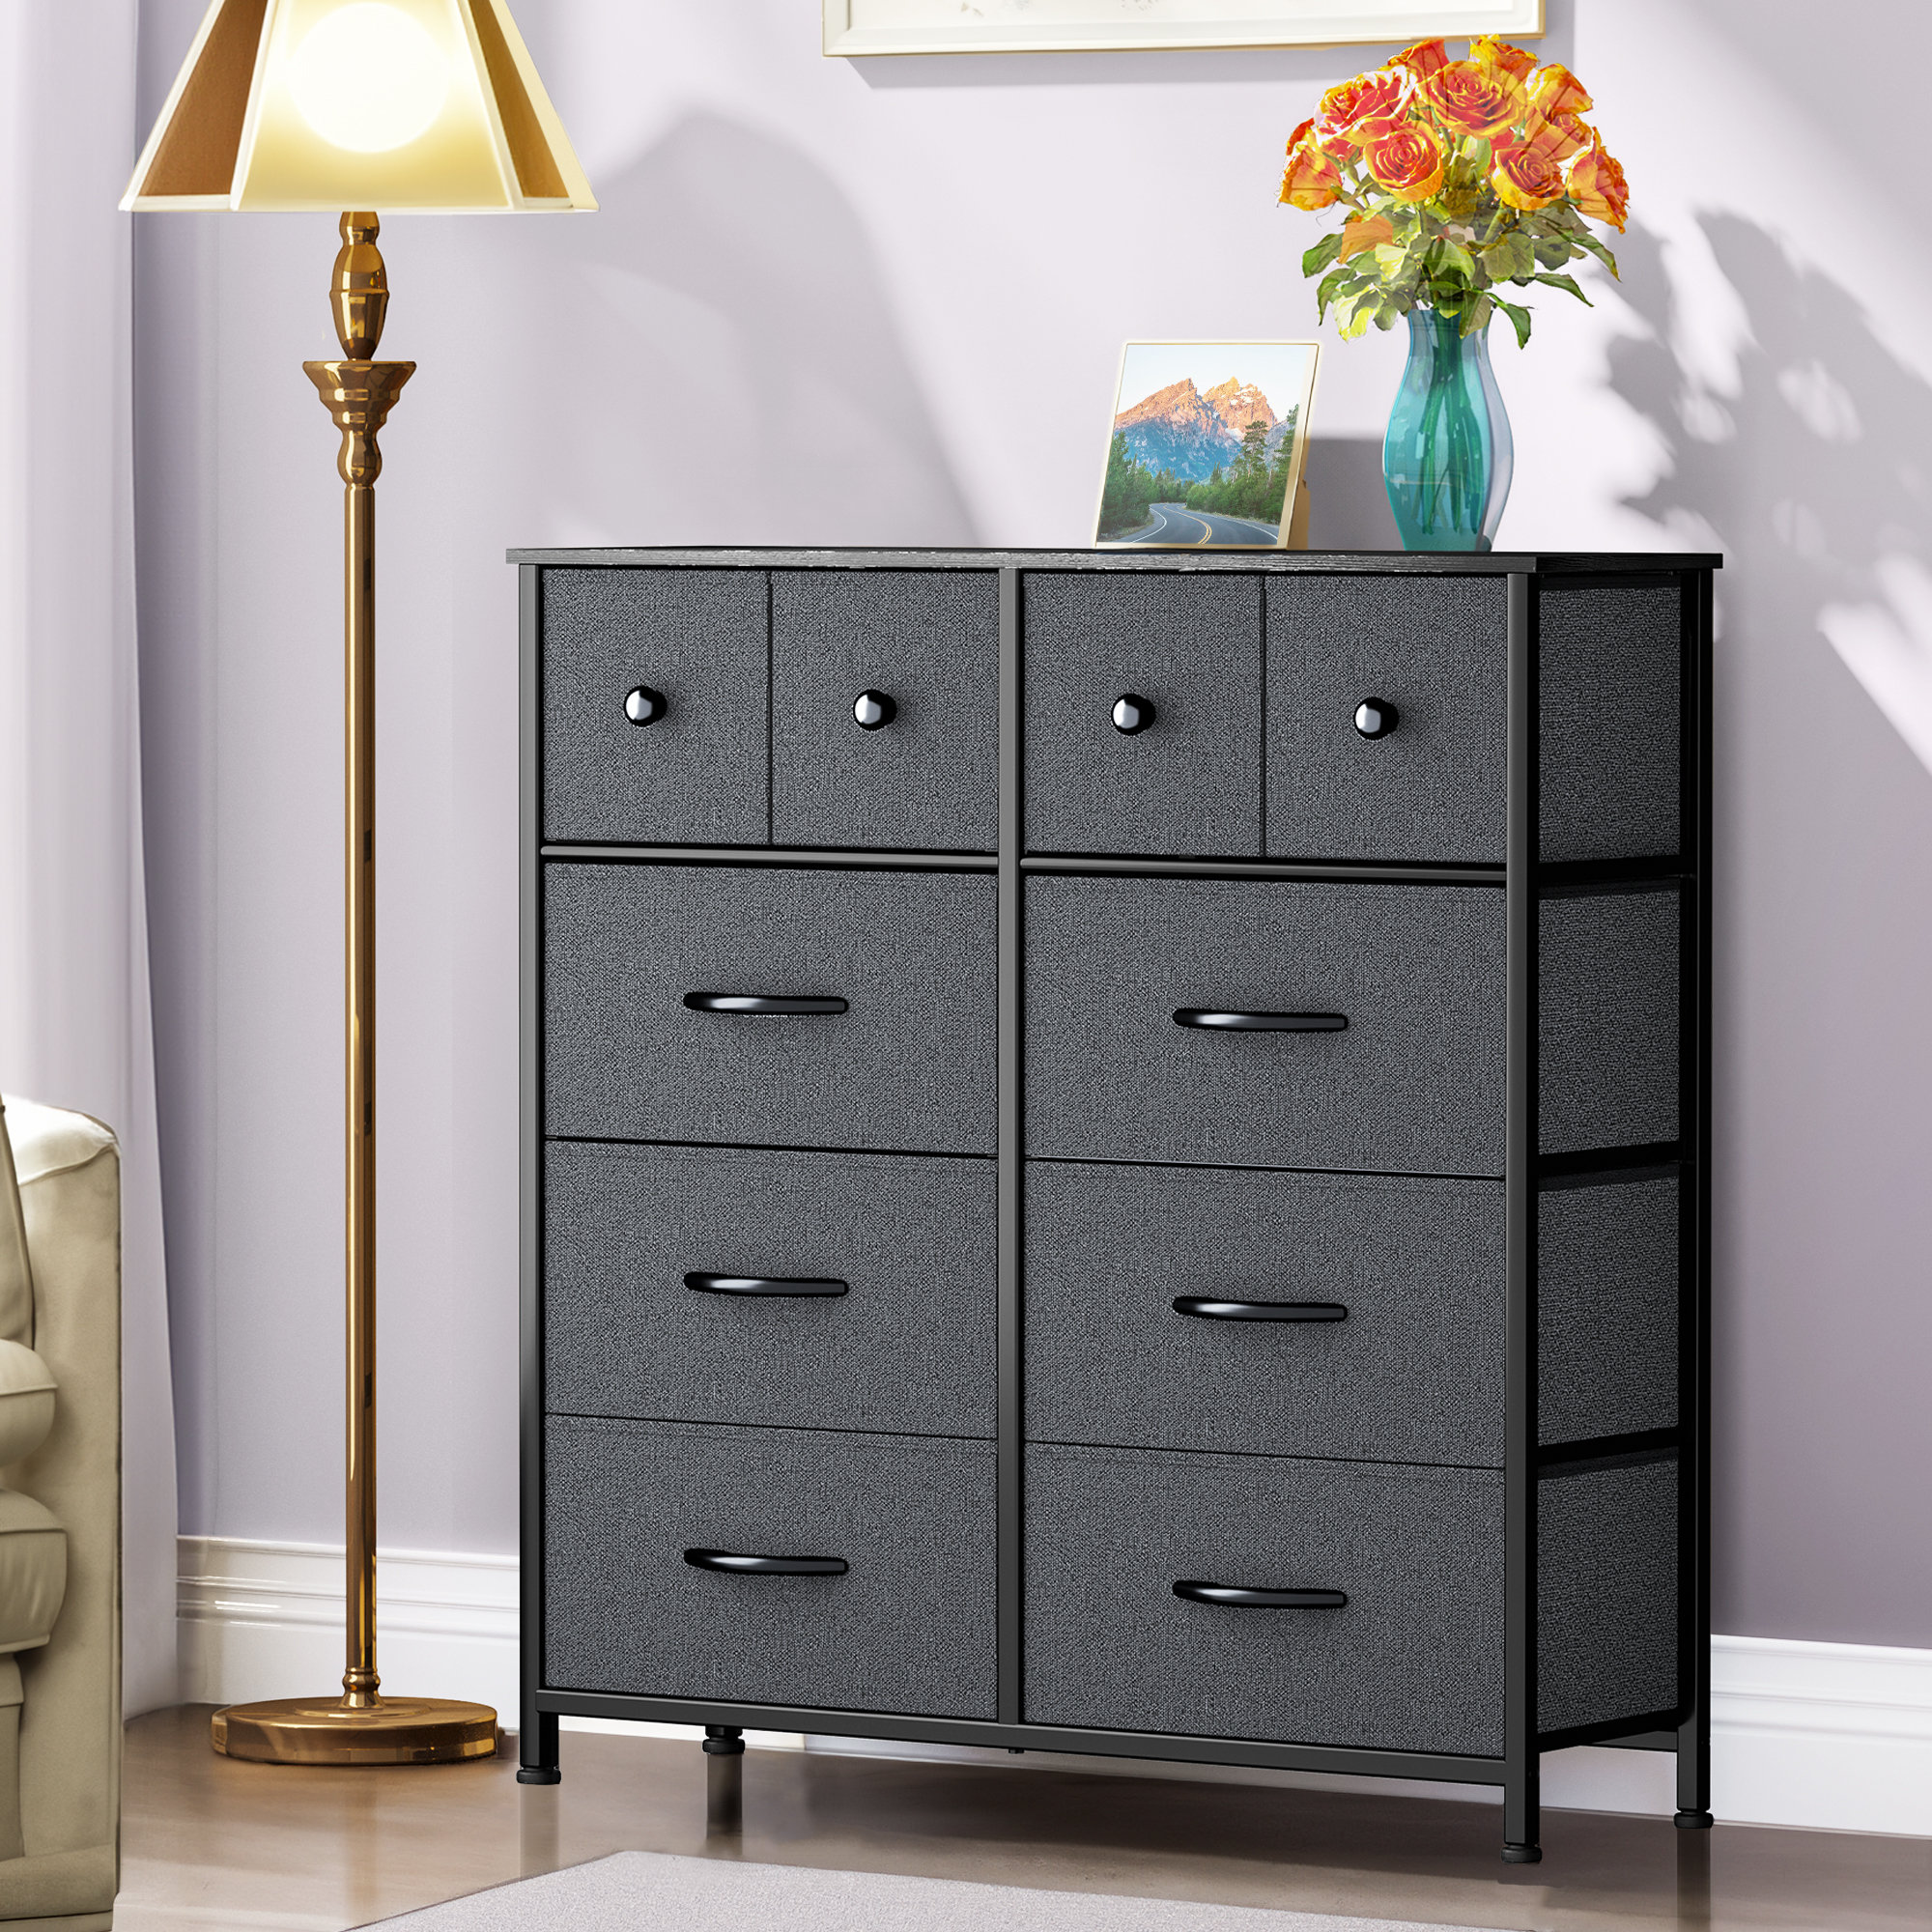 Yitahome  7 Drawer Chest With Wooden Baffle And Steel Frame